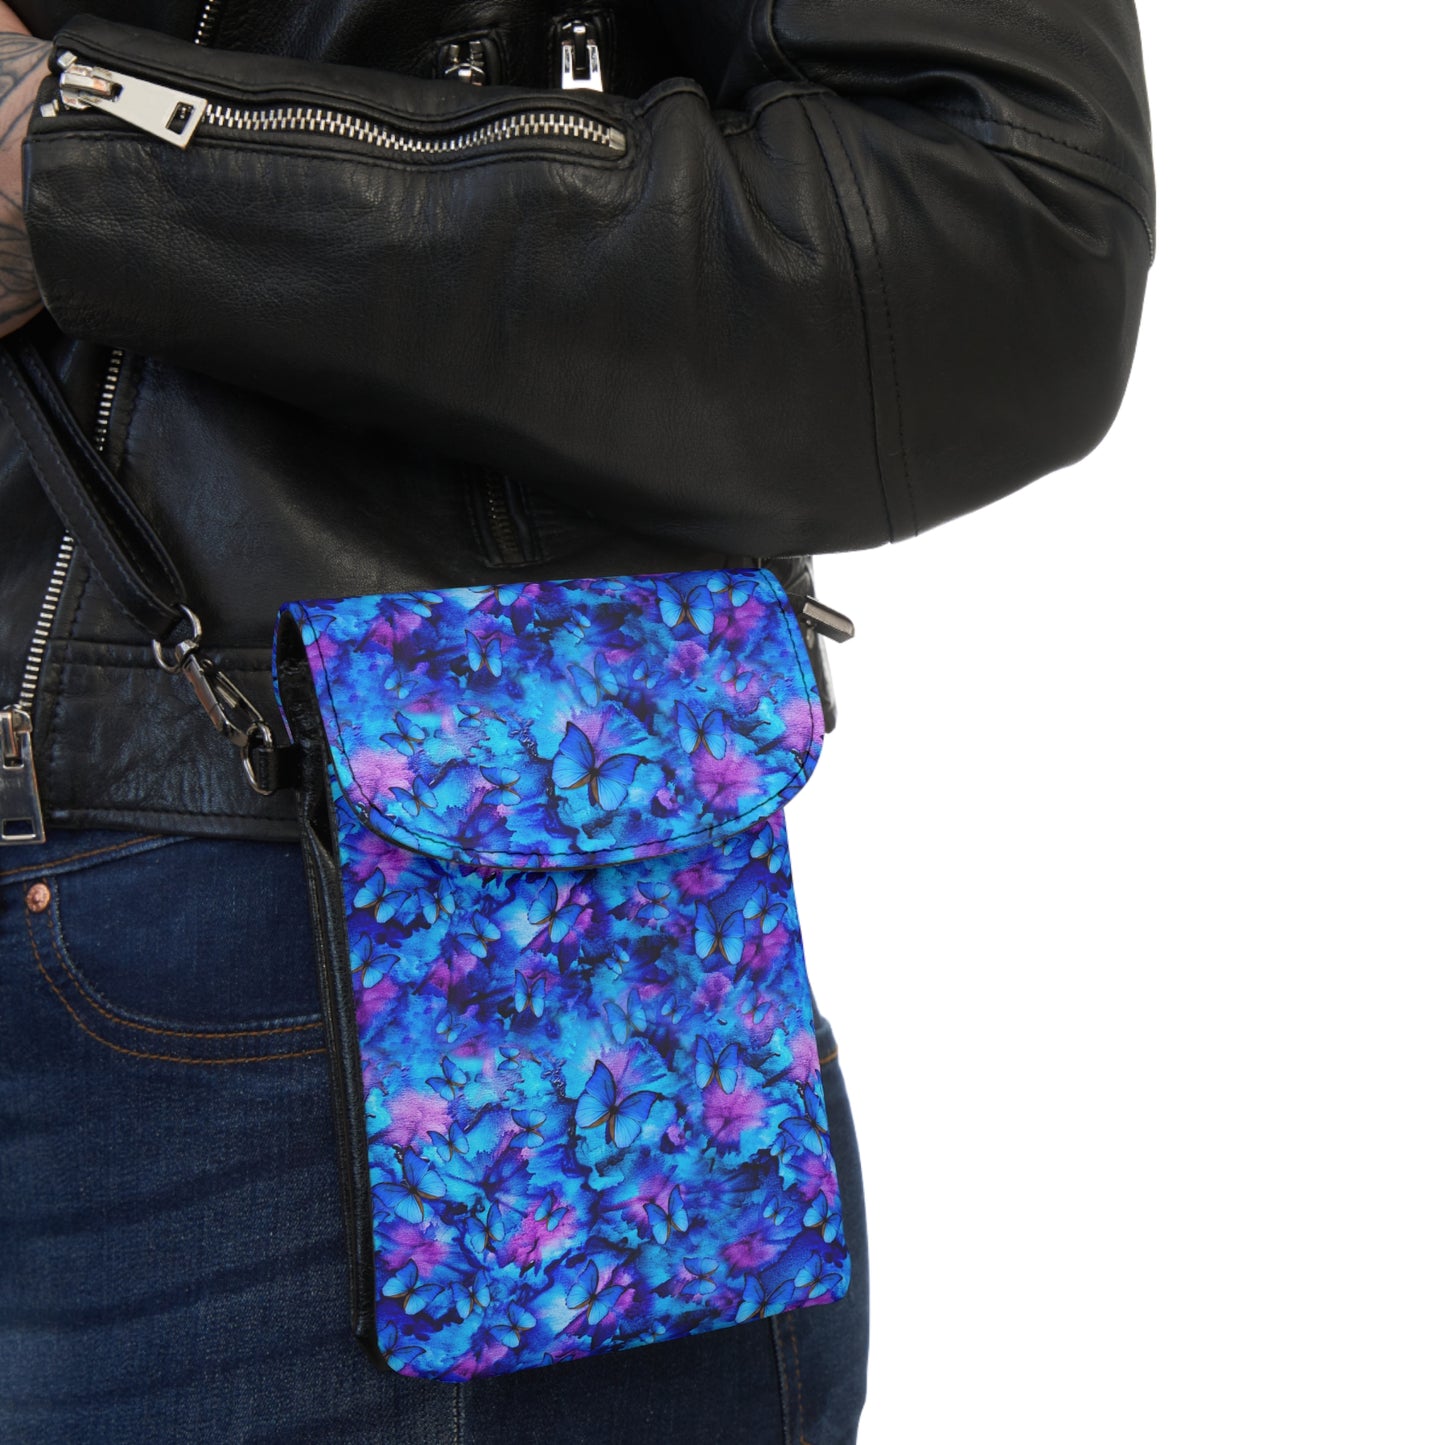 Crossbody Cell Phone Bag - Dancing with Butterflies